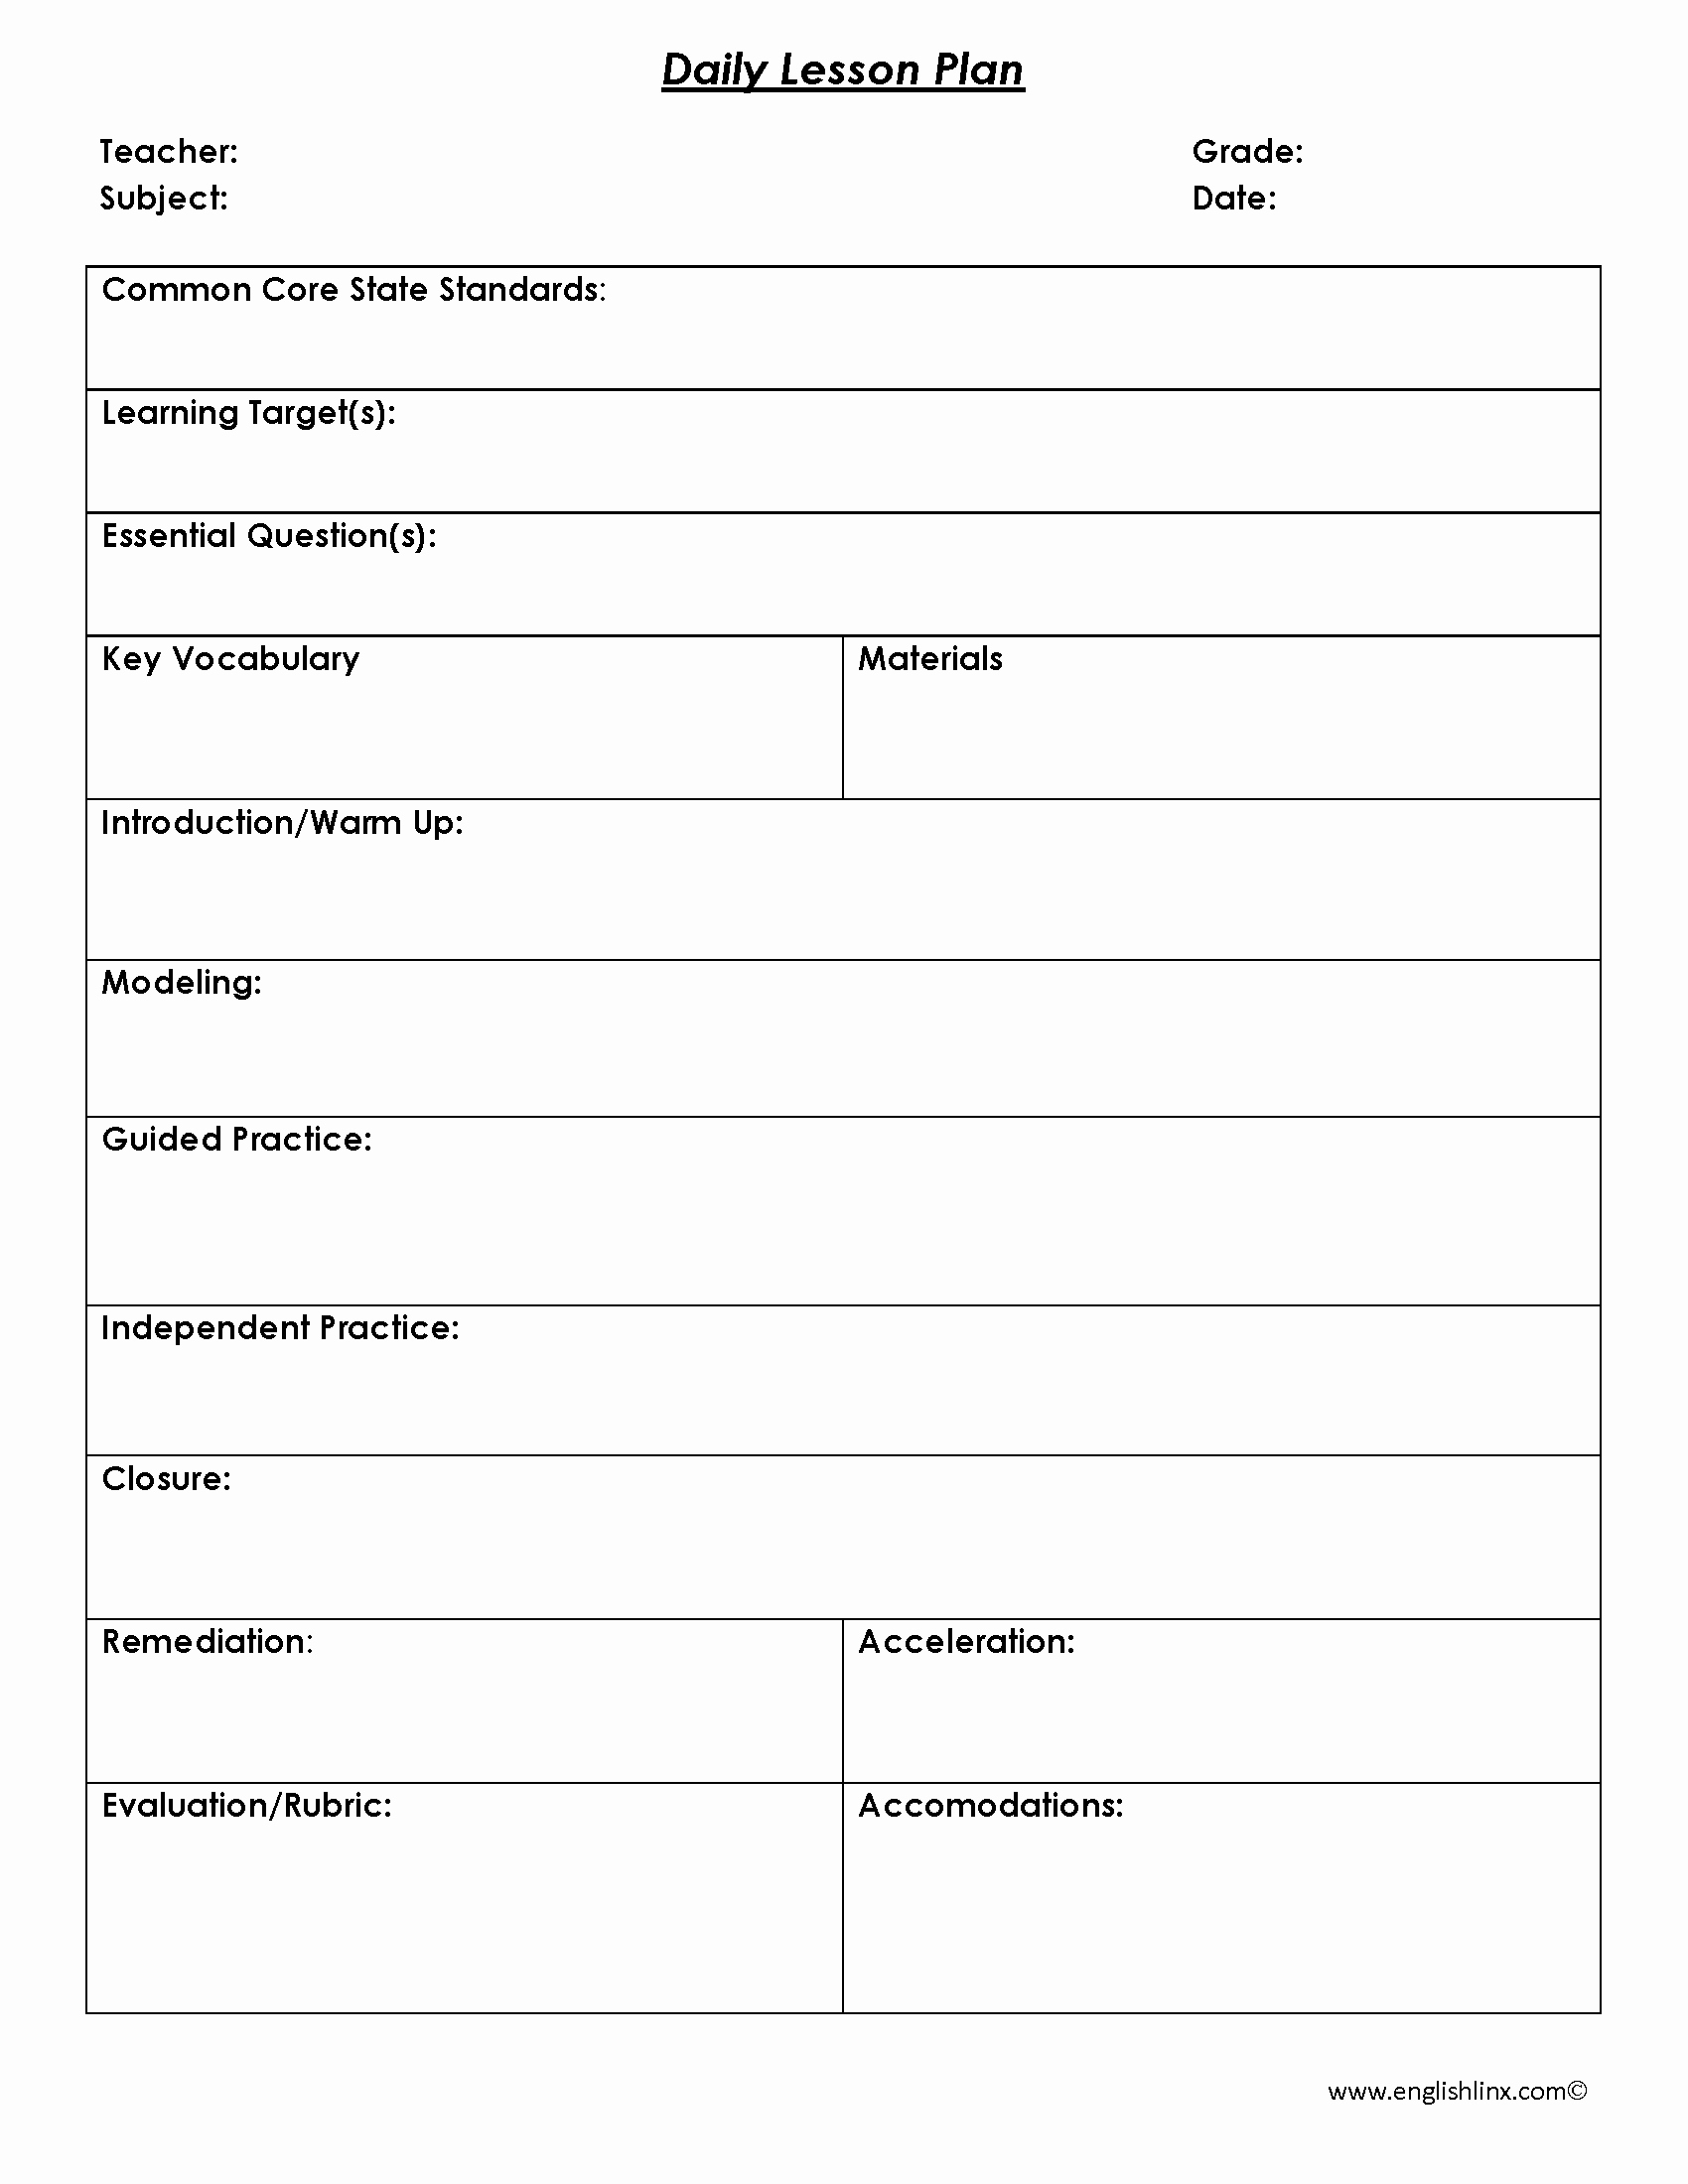 Free Daily Lesson Plan Template Elegant Lesson Plan Template